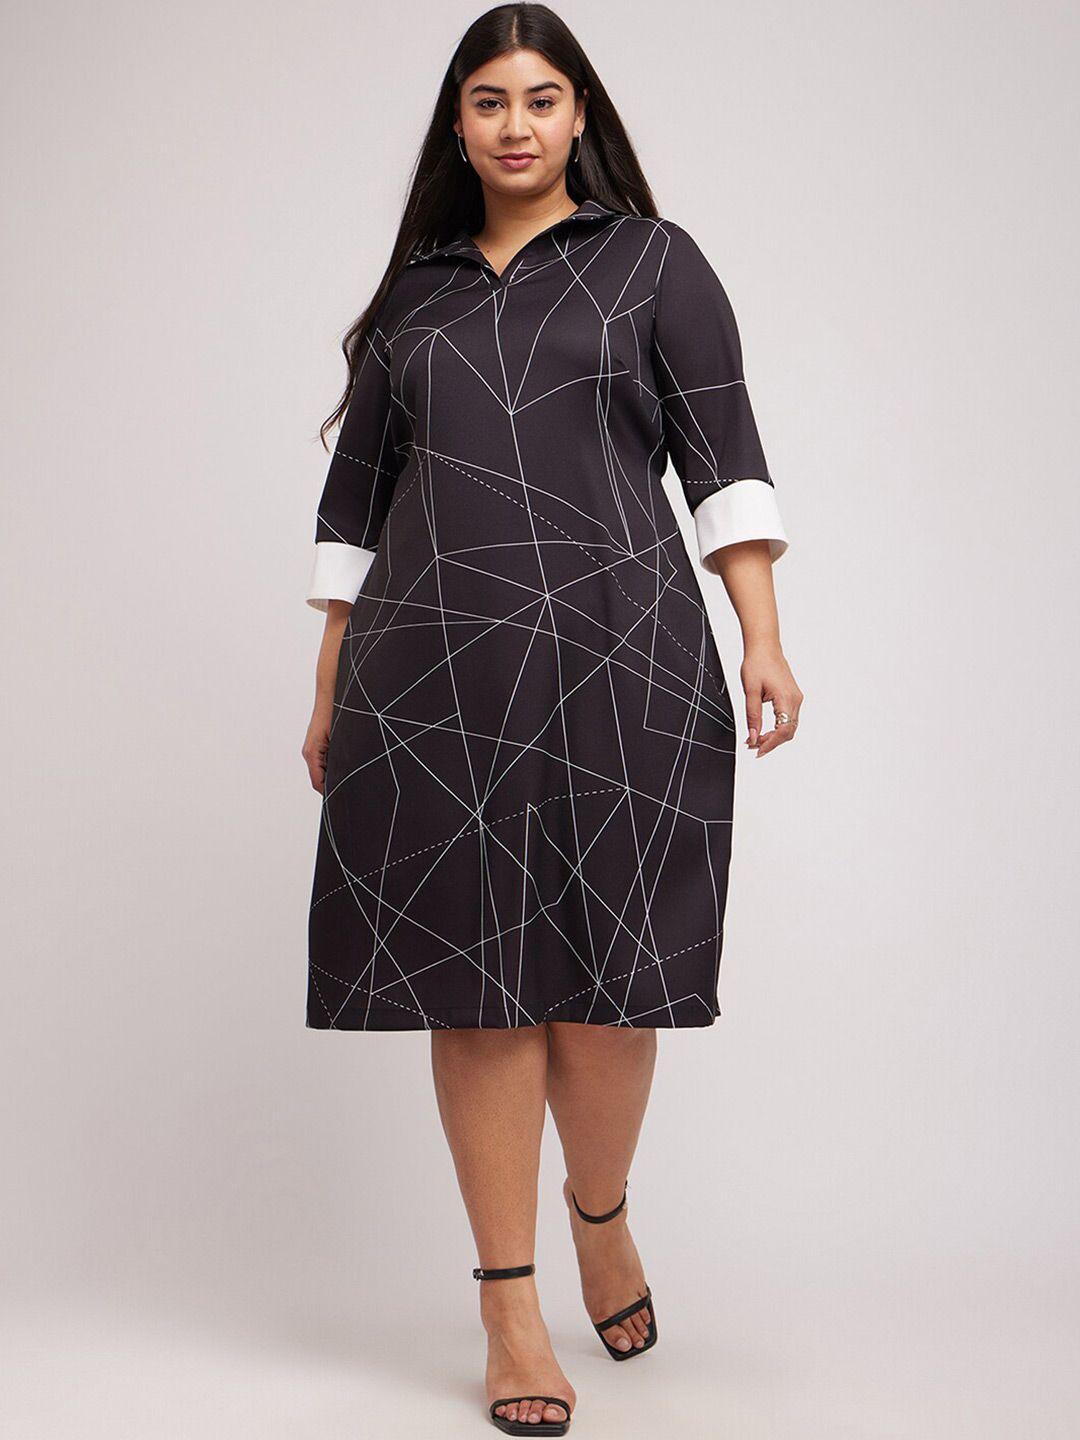 fablestreet x abstract formal shirt plus size dress